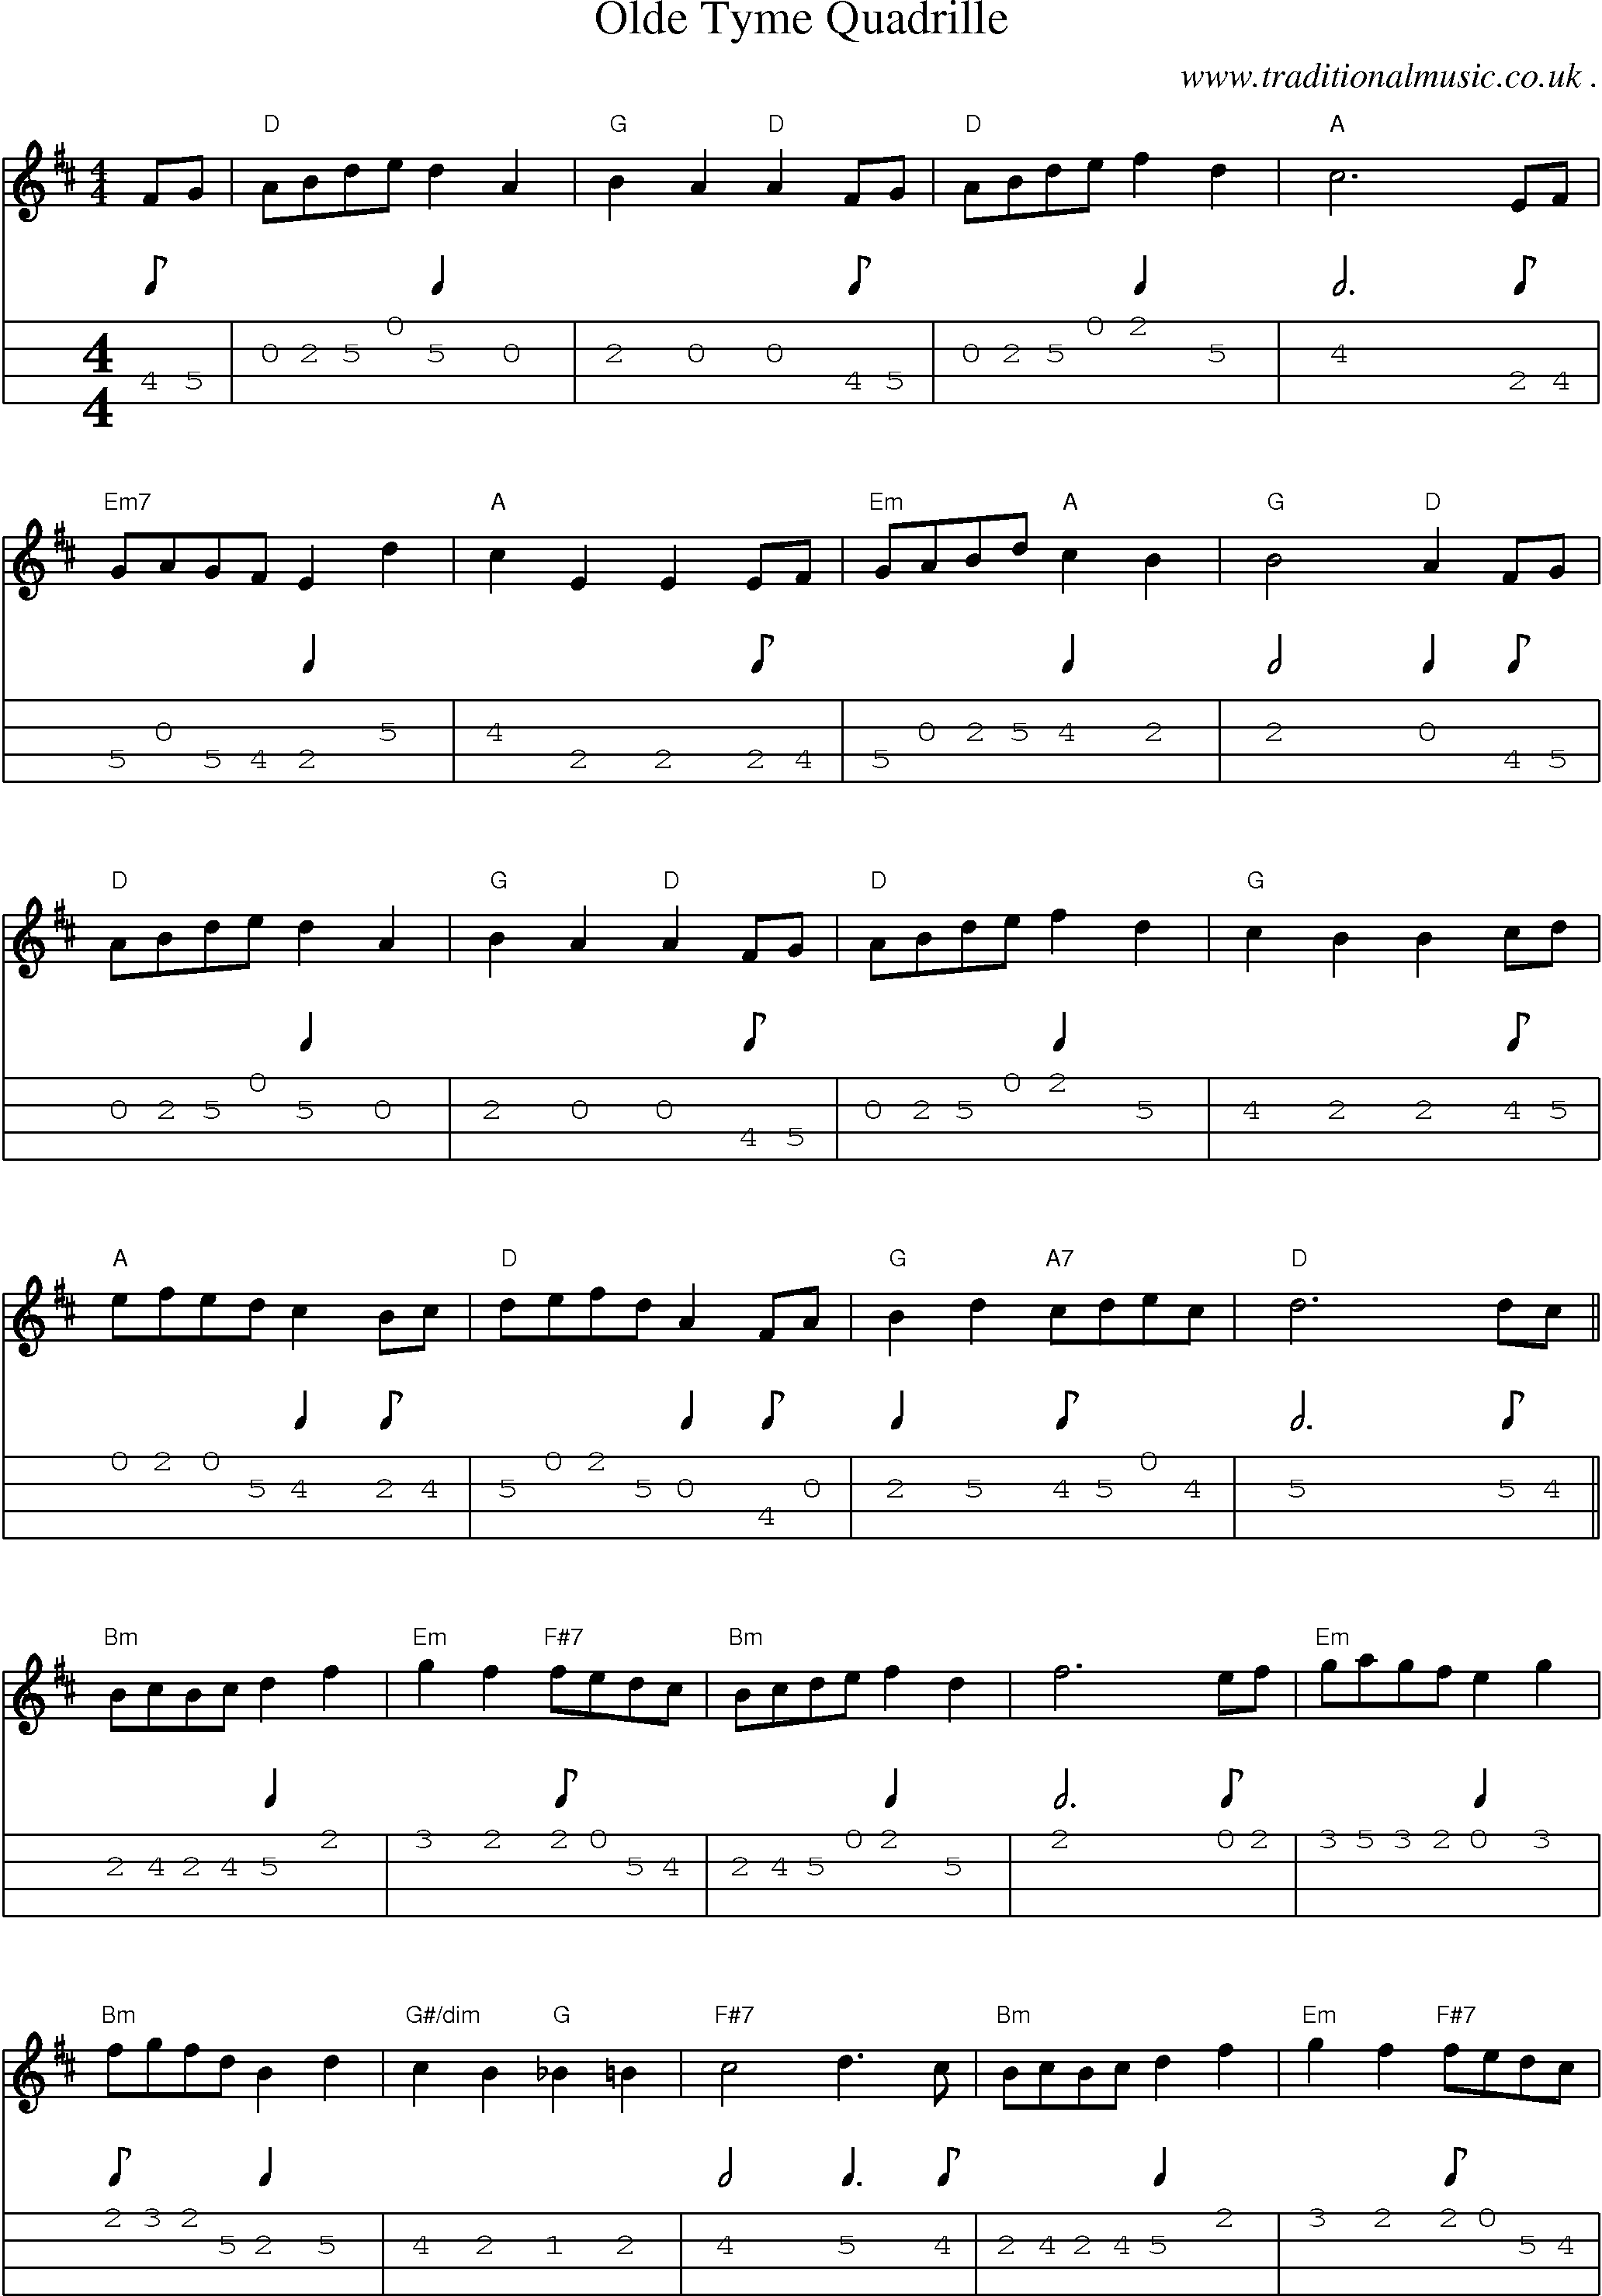 Sheet-Music and Mandolin Tabs for Olde Tyme Quadrille